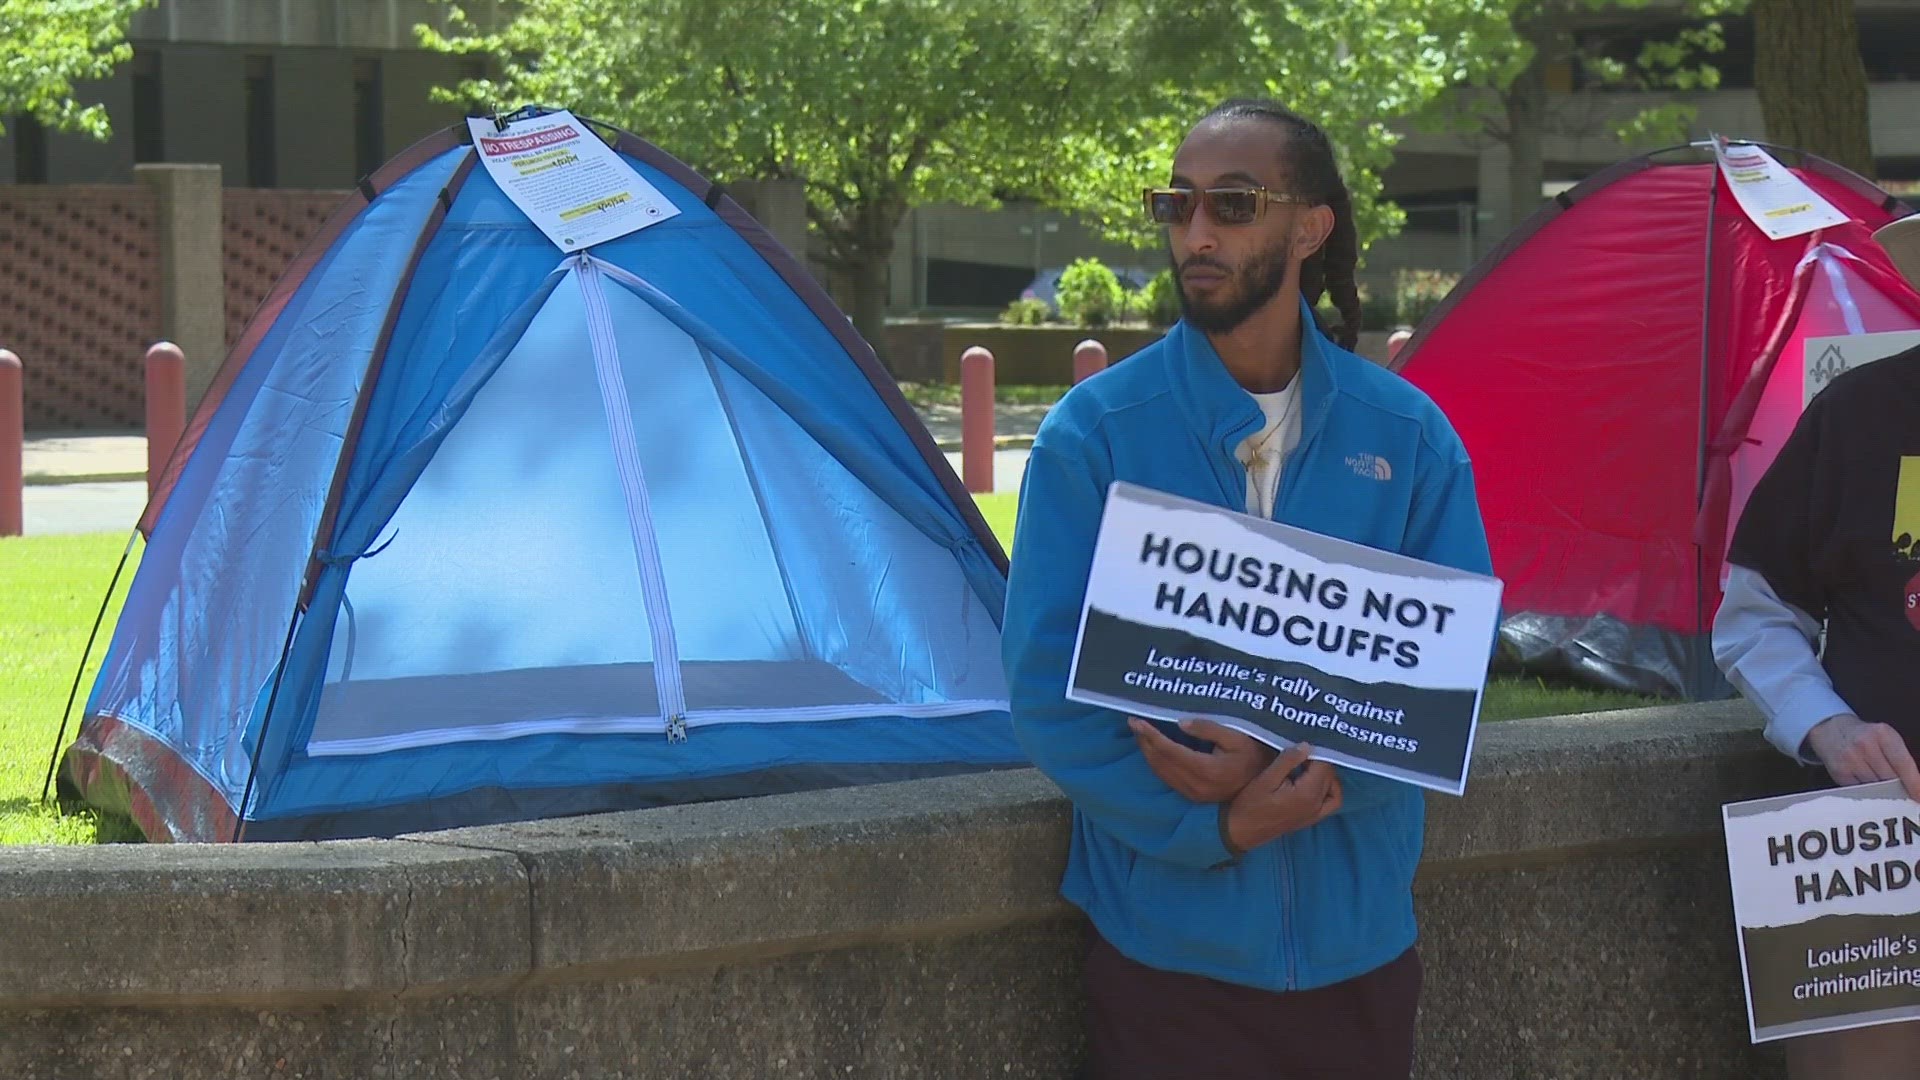 About 25 tents were set up throughout the downtown Louisville park with "no trespassing" citations attached to them.